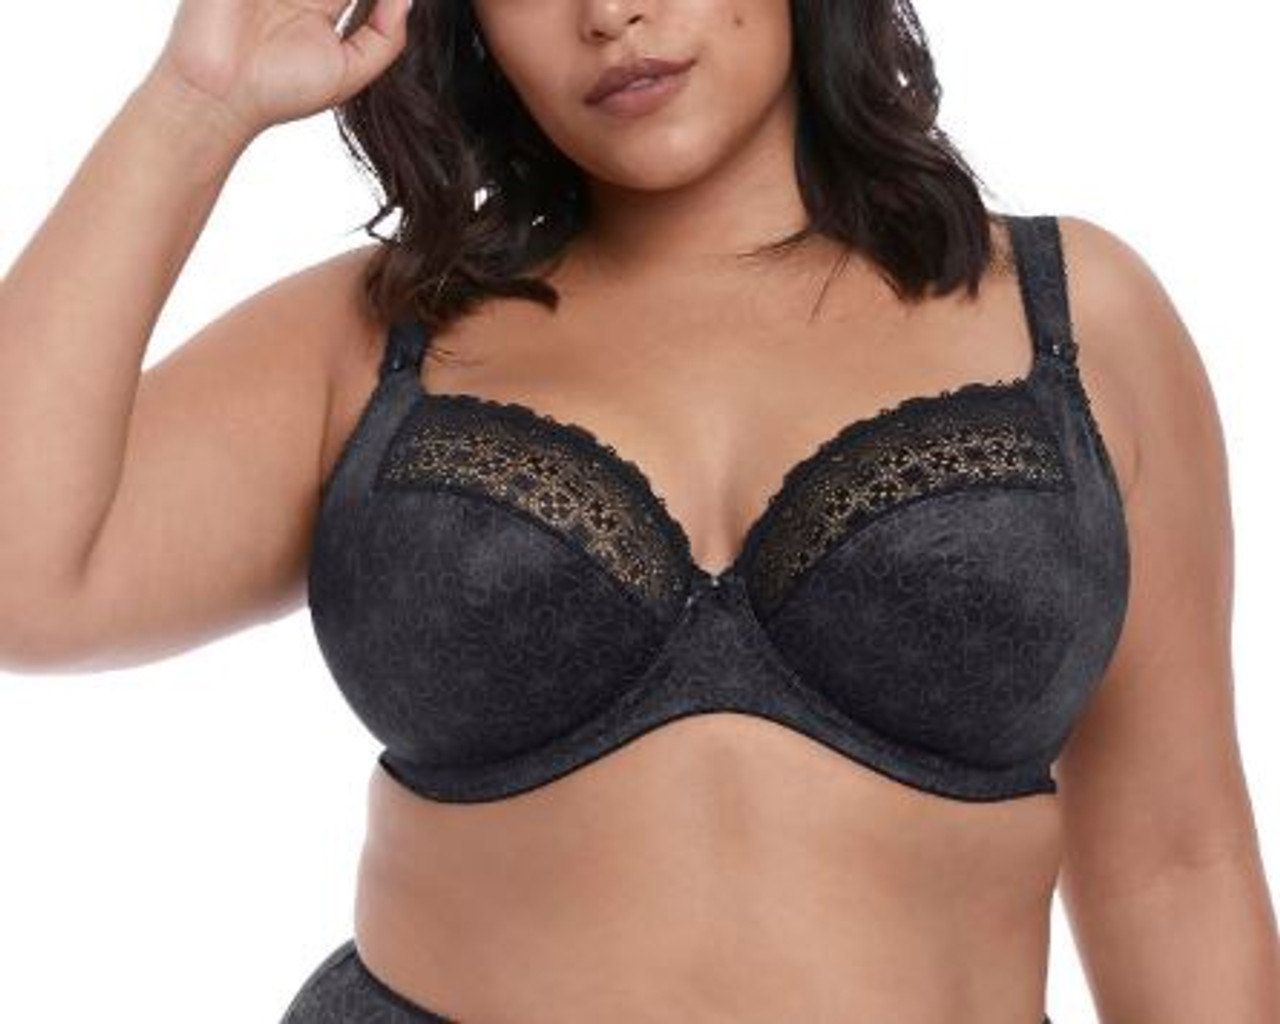 Elomi Charley Underwire Plunge Bra with Stretch Lace in Honeysuckle (HOE)  FINAL SALE (40% Off)